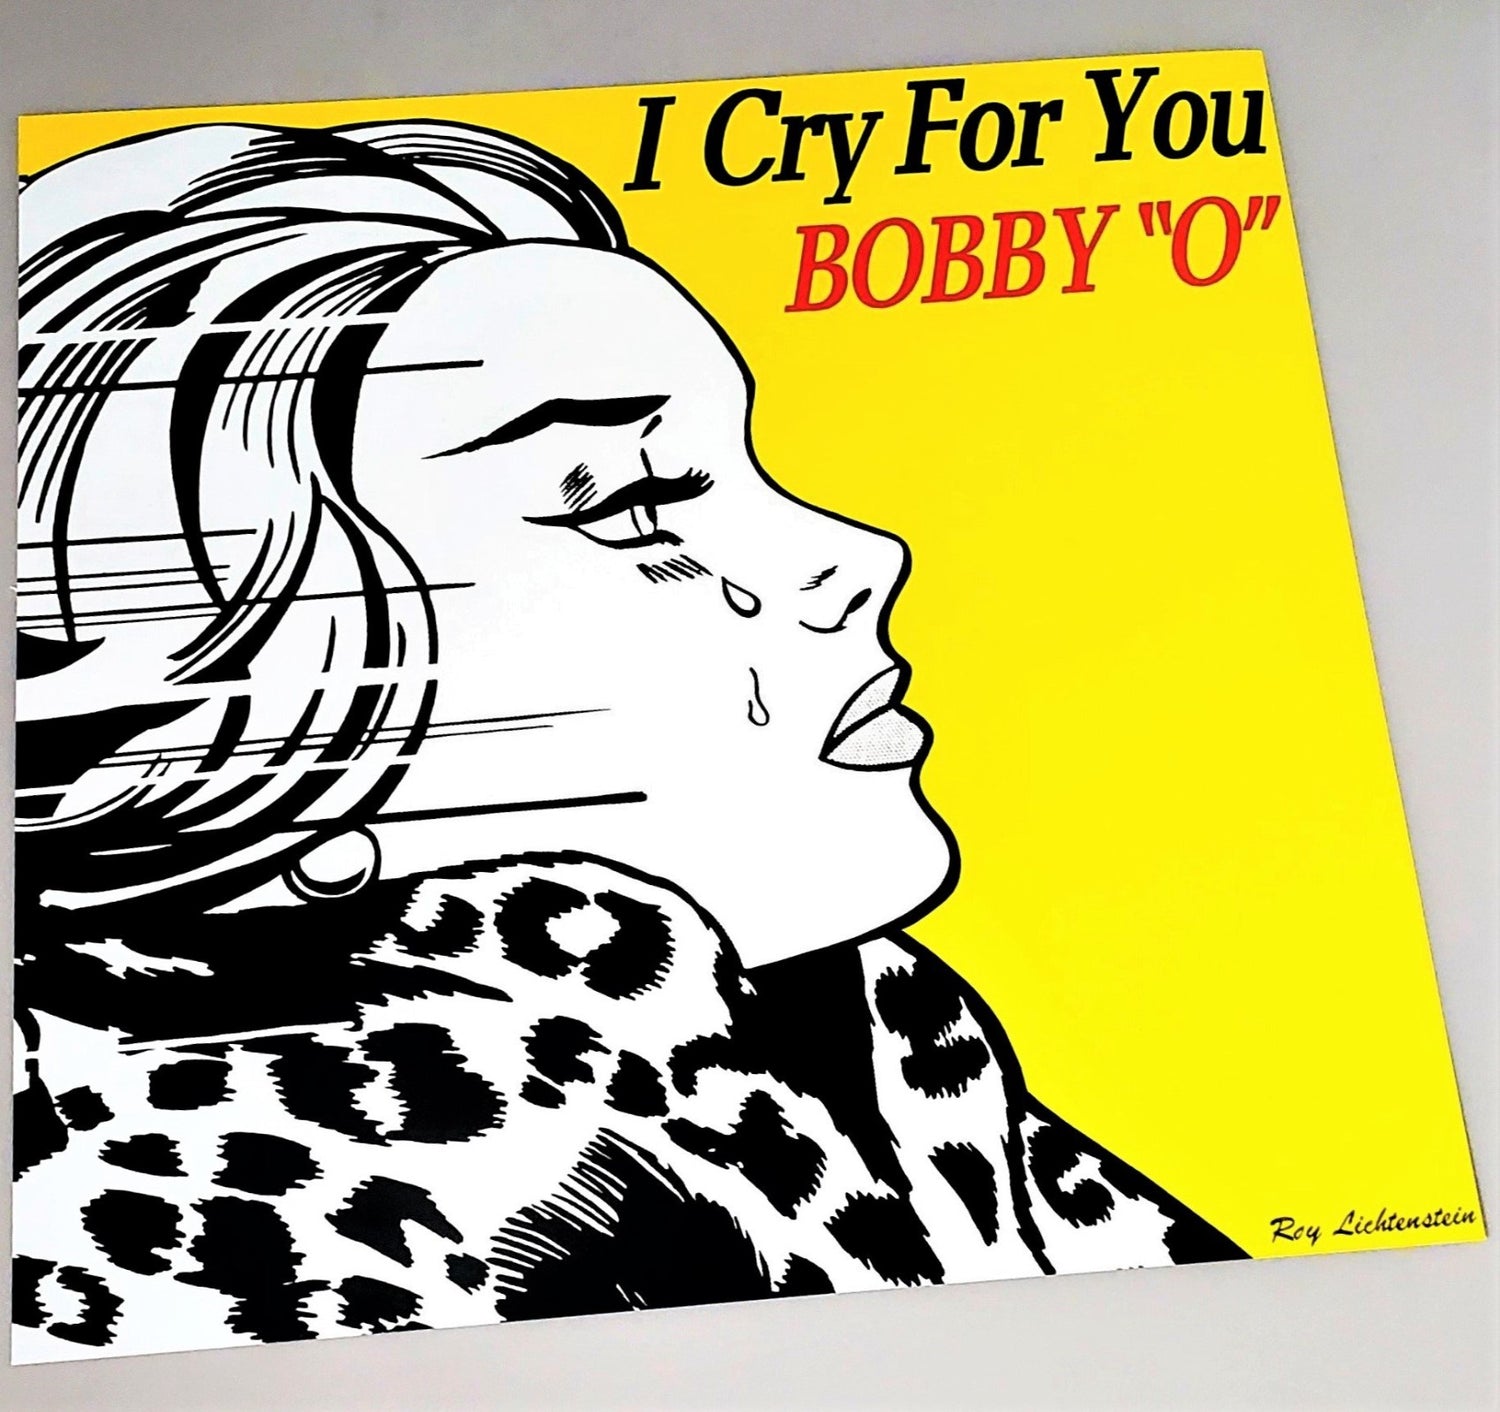 Bobby "O" cover art page of I Cry For You 12" featured in 2017 Art by Roy Lichtenstein Record Covers 